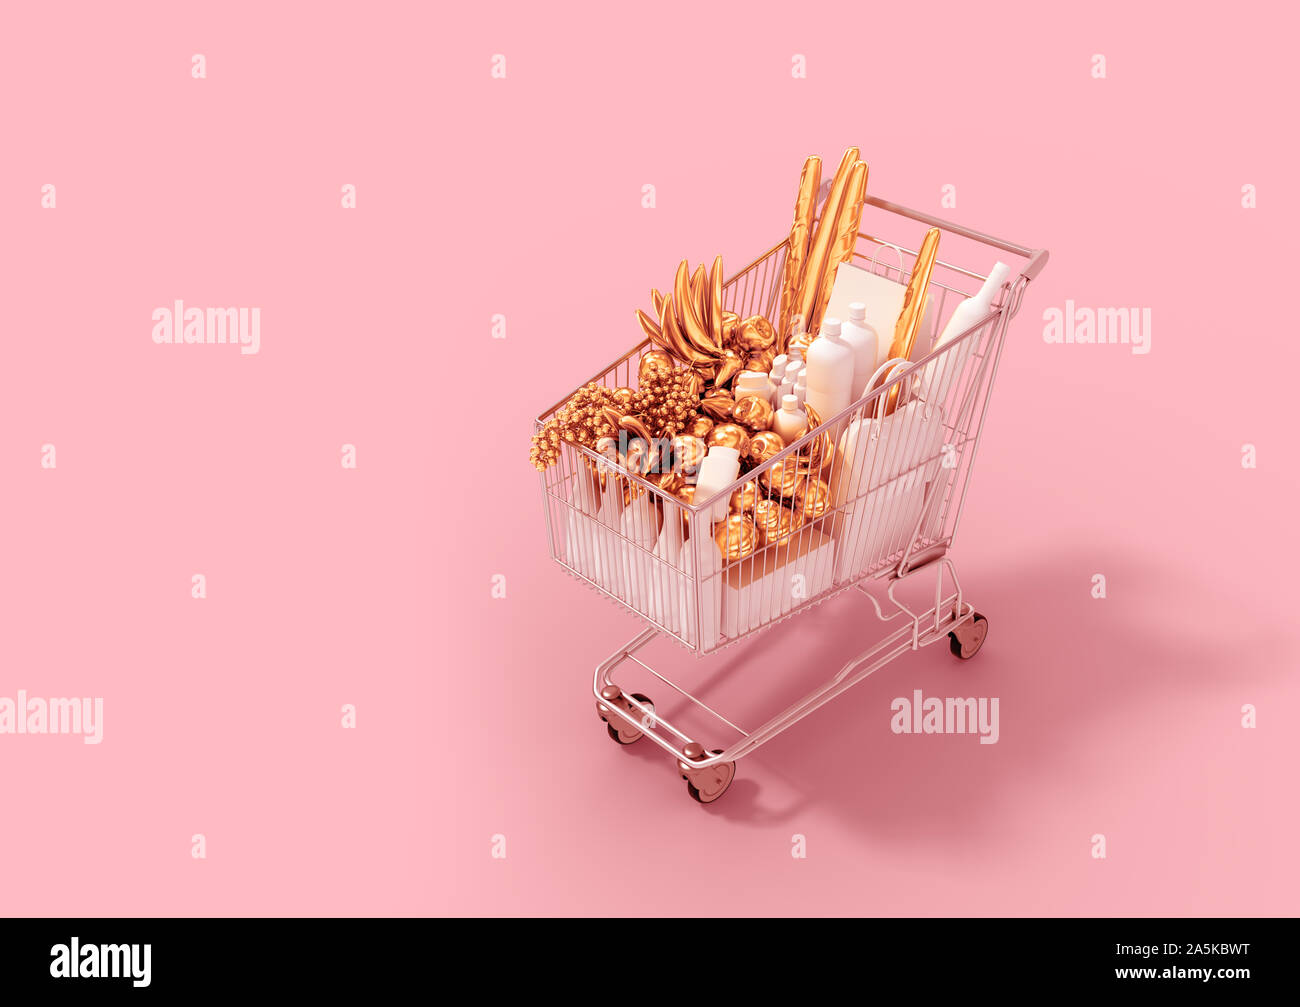 Shopping Cart With Gold Products And White Goods On Pink Background. 3D Illustration. Stock Photo